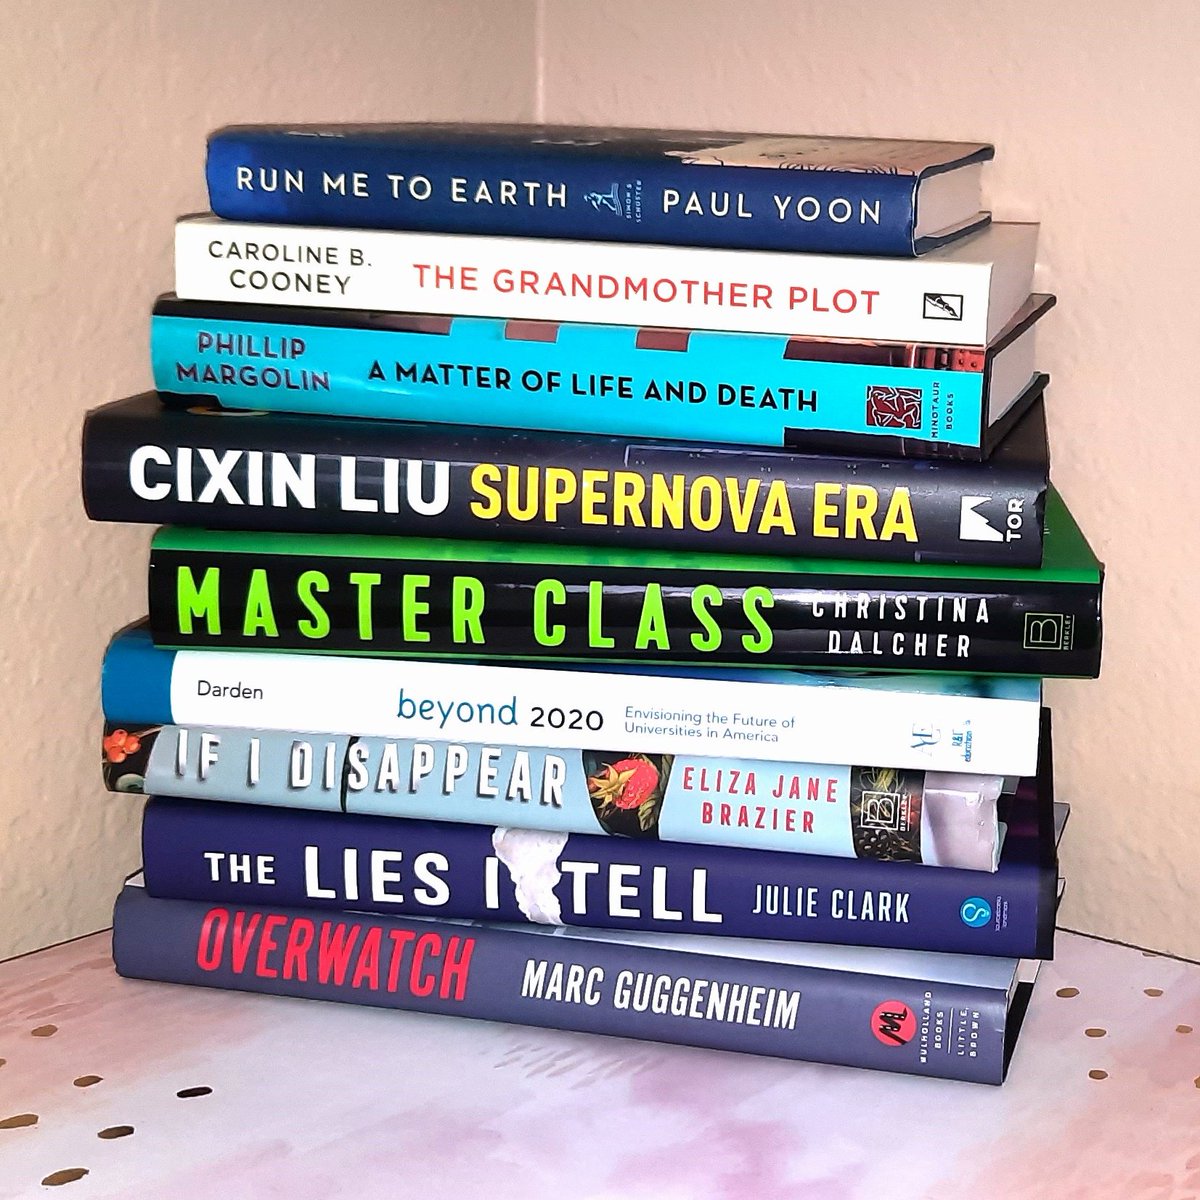 This stack represents a fraction of my always-growing,  ever-changing #TBR pile. Some old, some new, some fiction, some non-fiction, some dramas, some lighter, etc. etc. 📚 📕 #Bookish #Books #BookWorm #Fiction #LoveToRead #NeedToRead #Nonfiction #Read #Readers #Reading #Stories